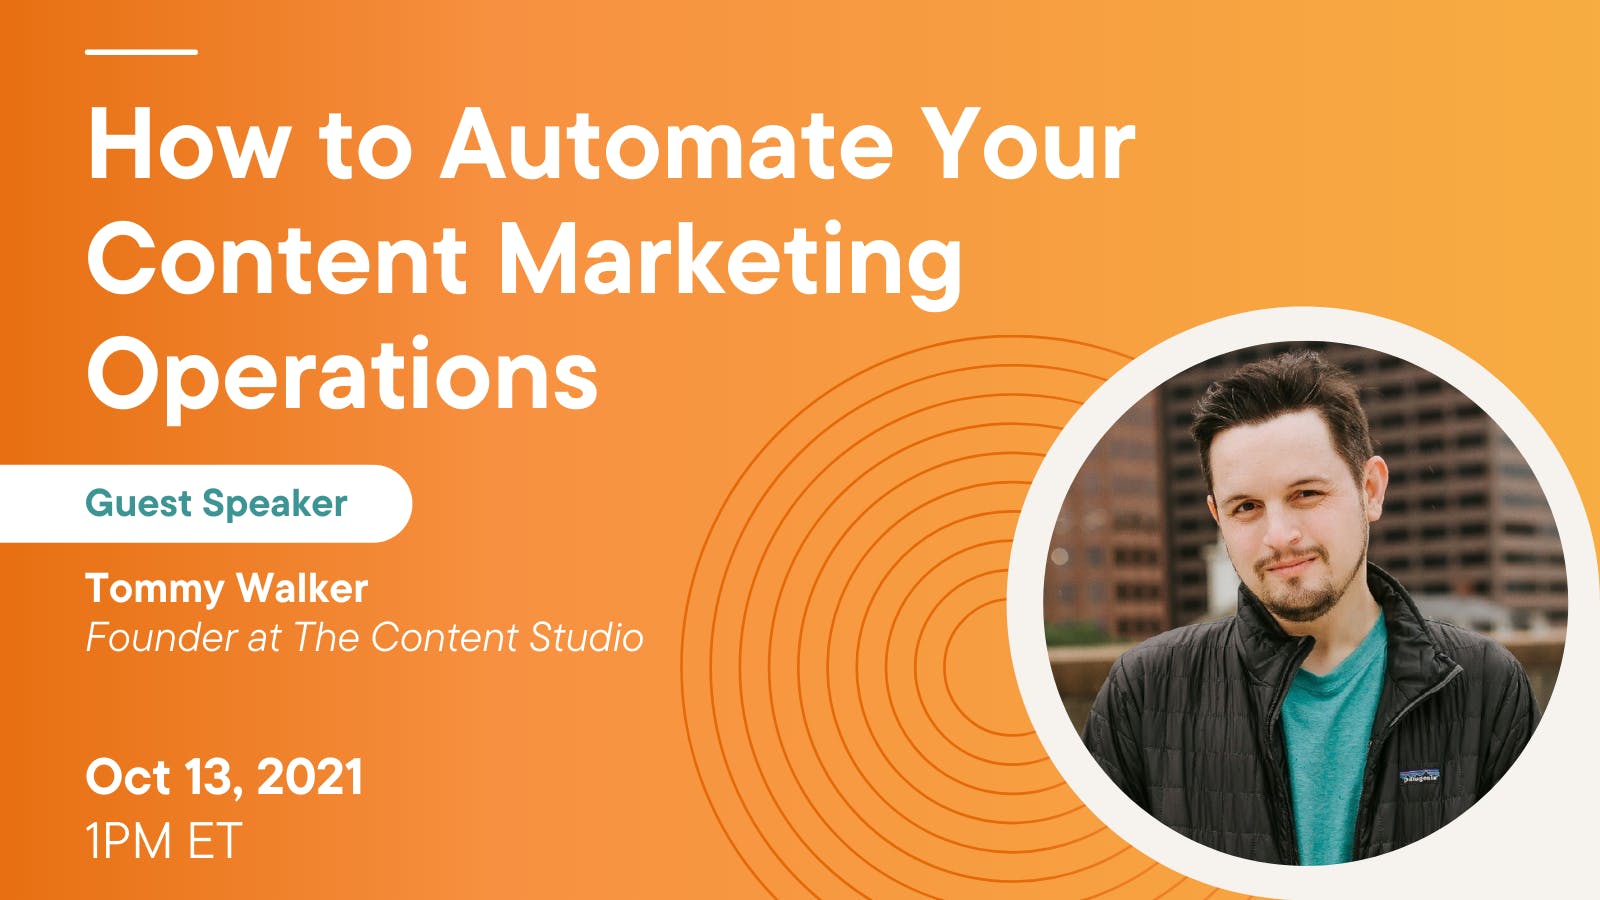 How to automate your content marketing operations